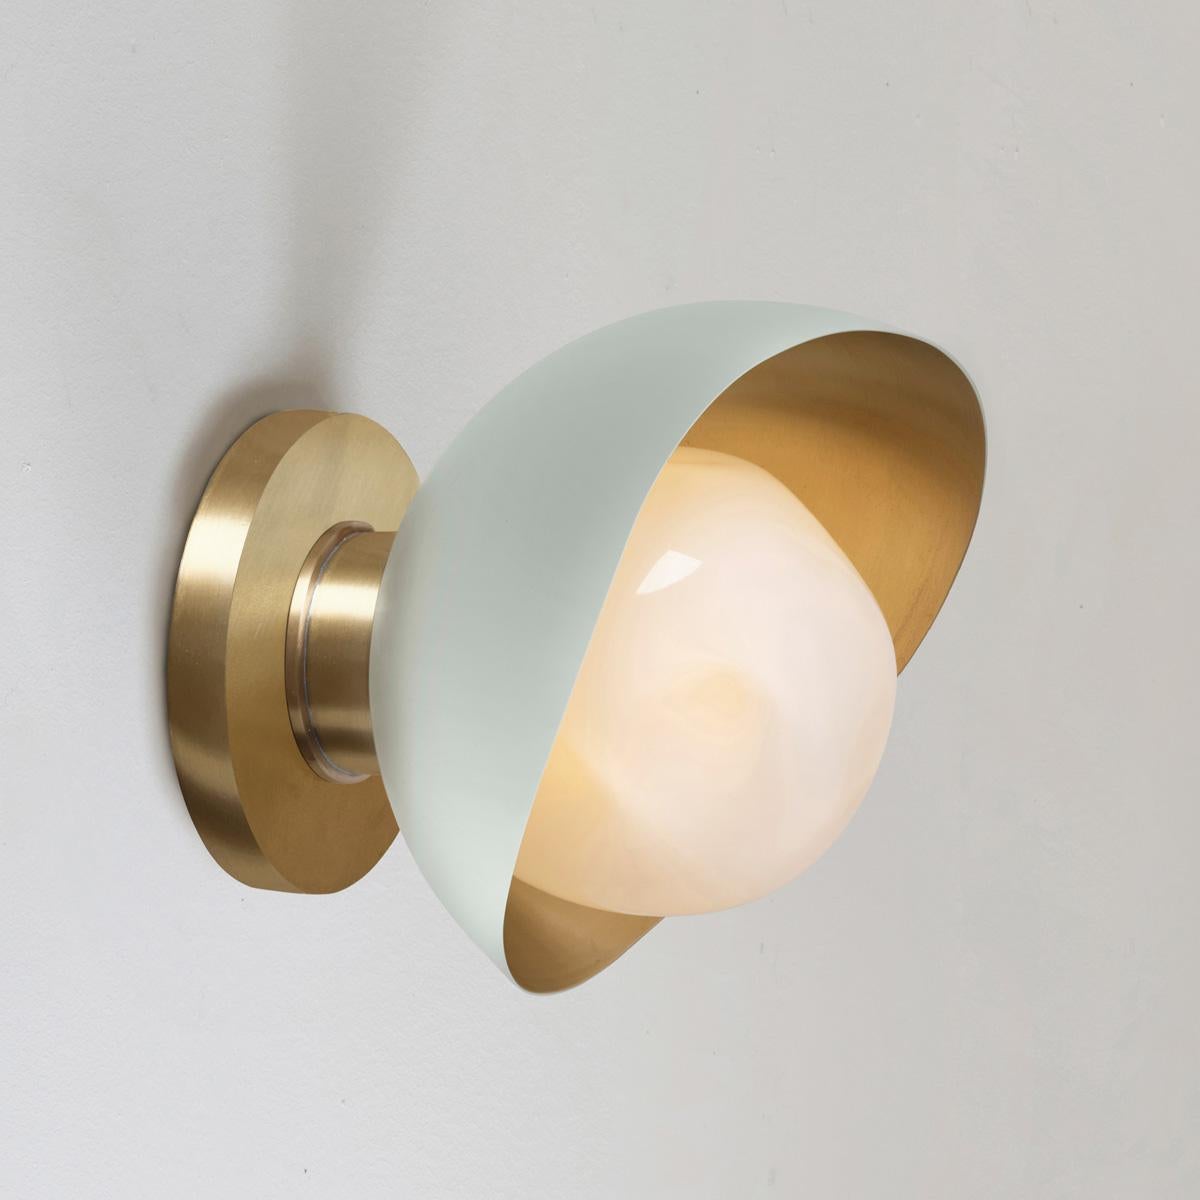 Perla Mini Wall Light by Gaspare Asaro. Black and Polished Brass Finish For Sale 2